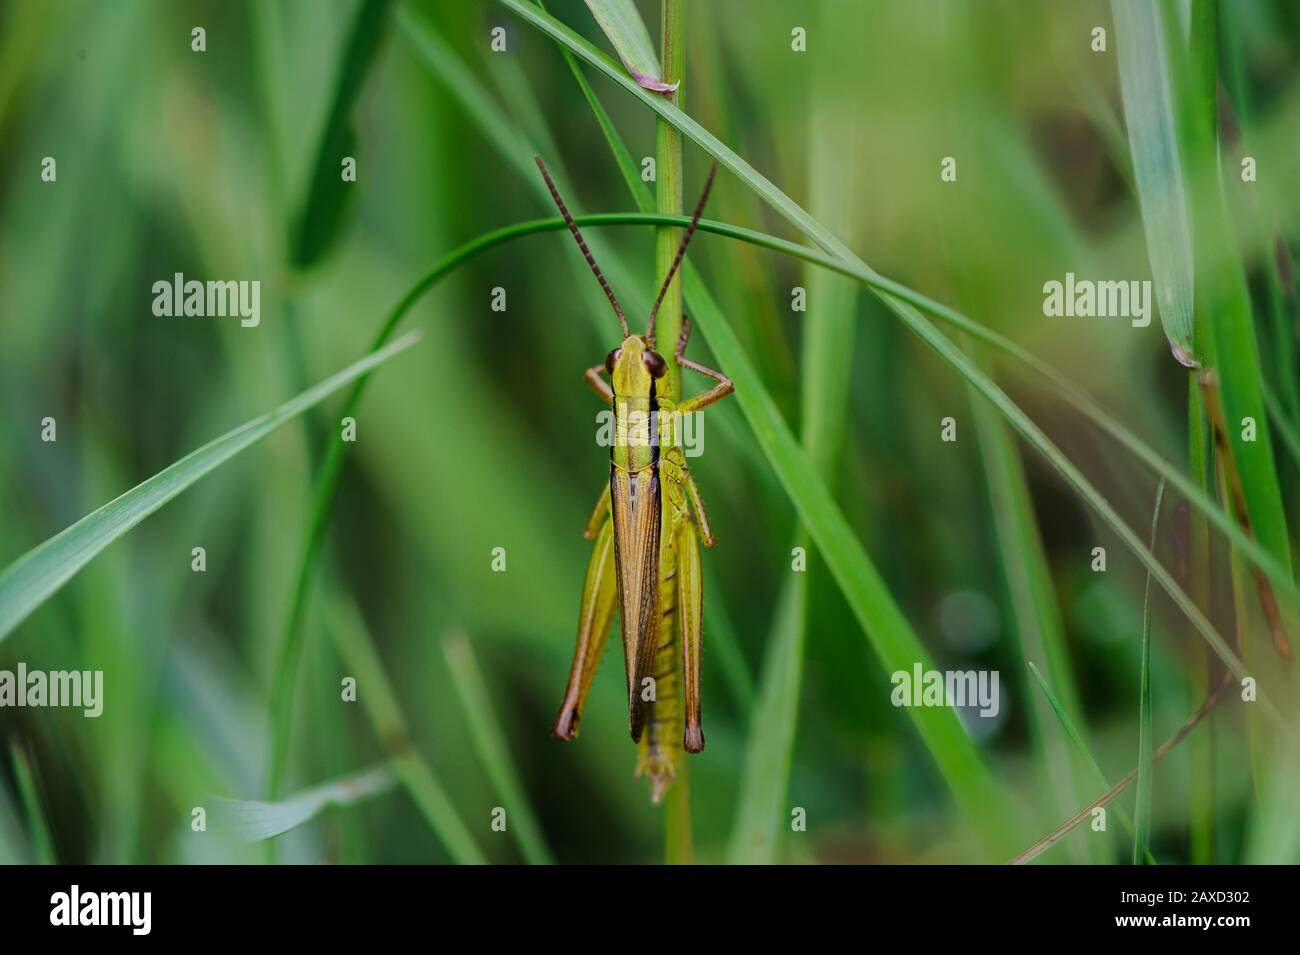 Macro of a green grasshopper on a blurred green background Stock Photo